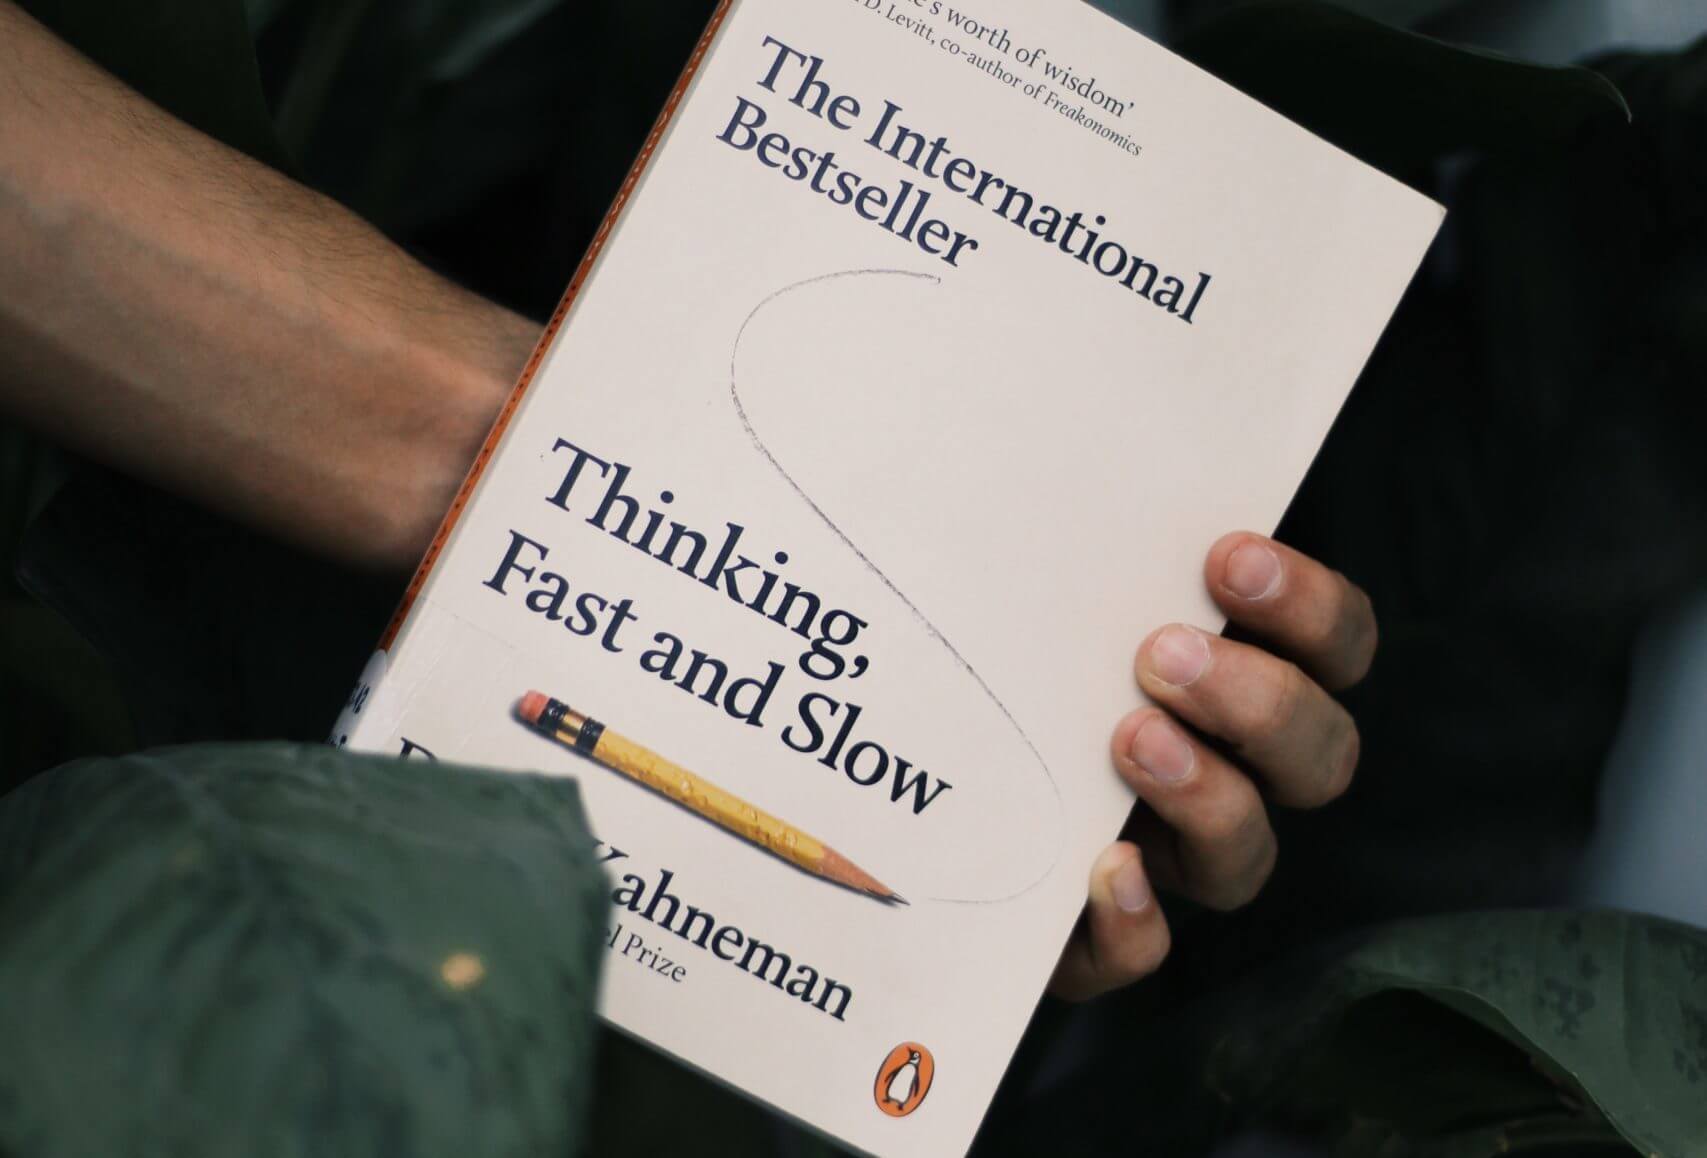 Thinking, Fast and Slow by Daniel Kahneman.